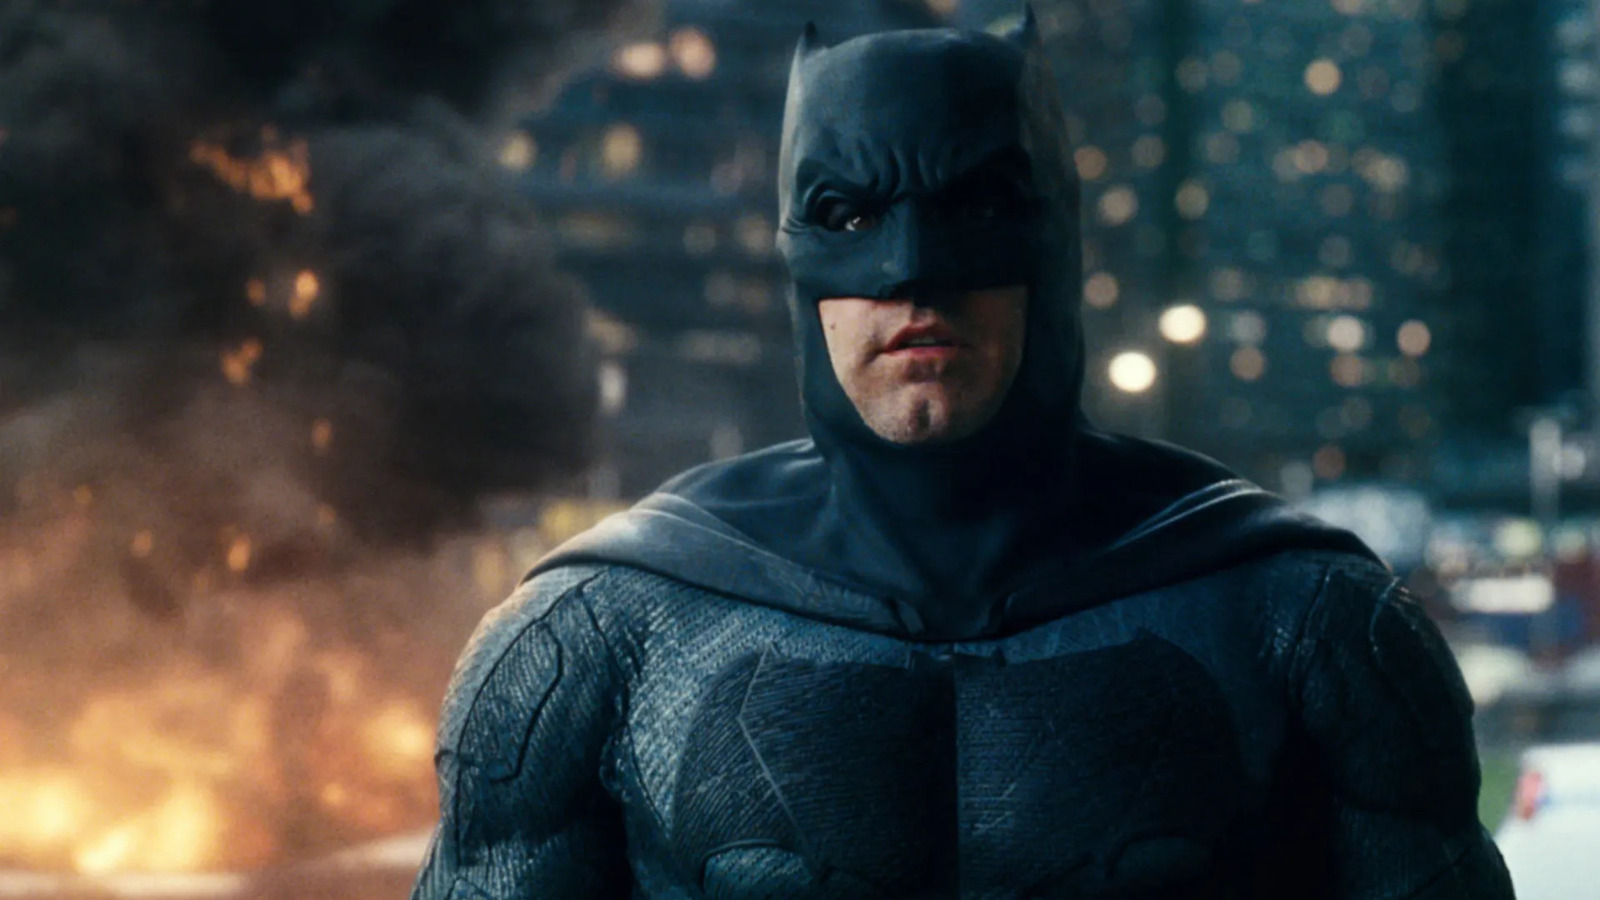 Ben Affleck is in talks to direct a feature film for DC